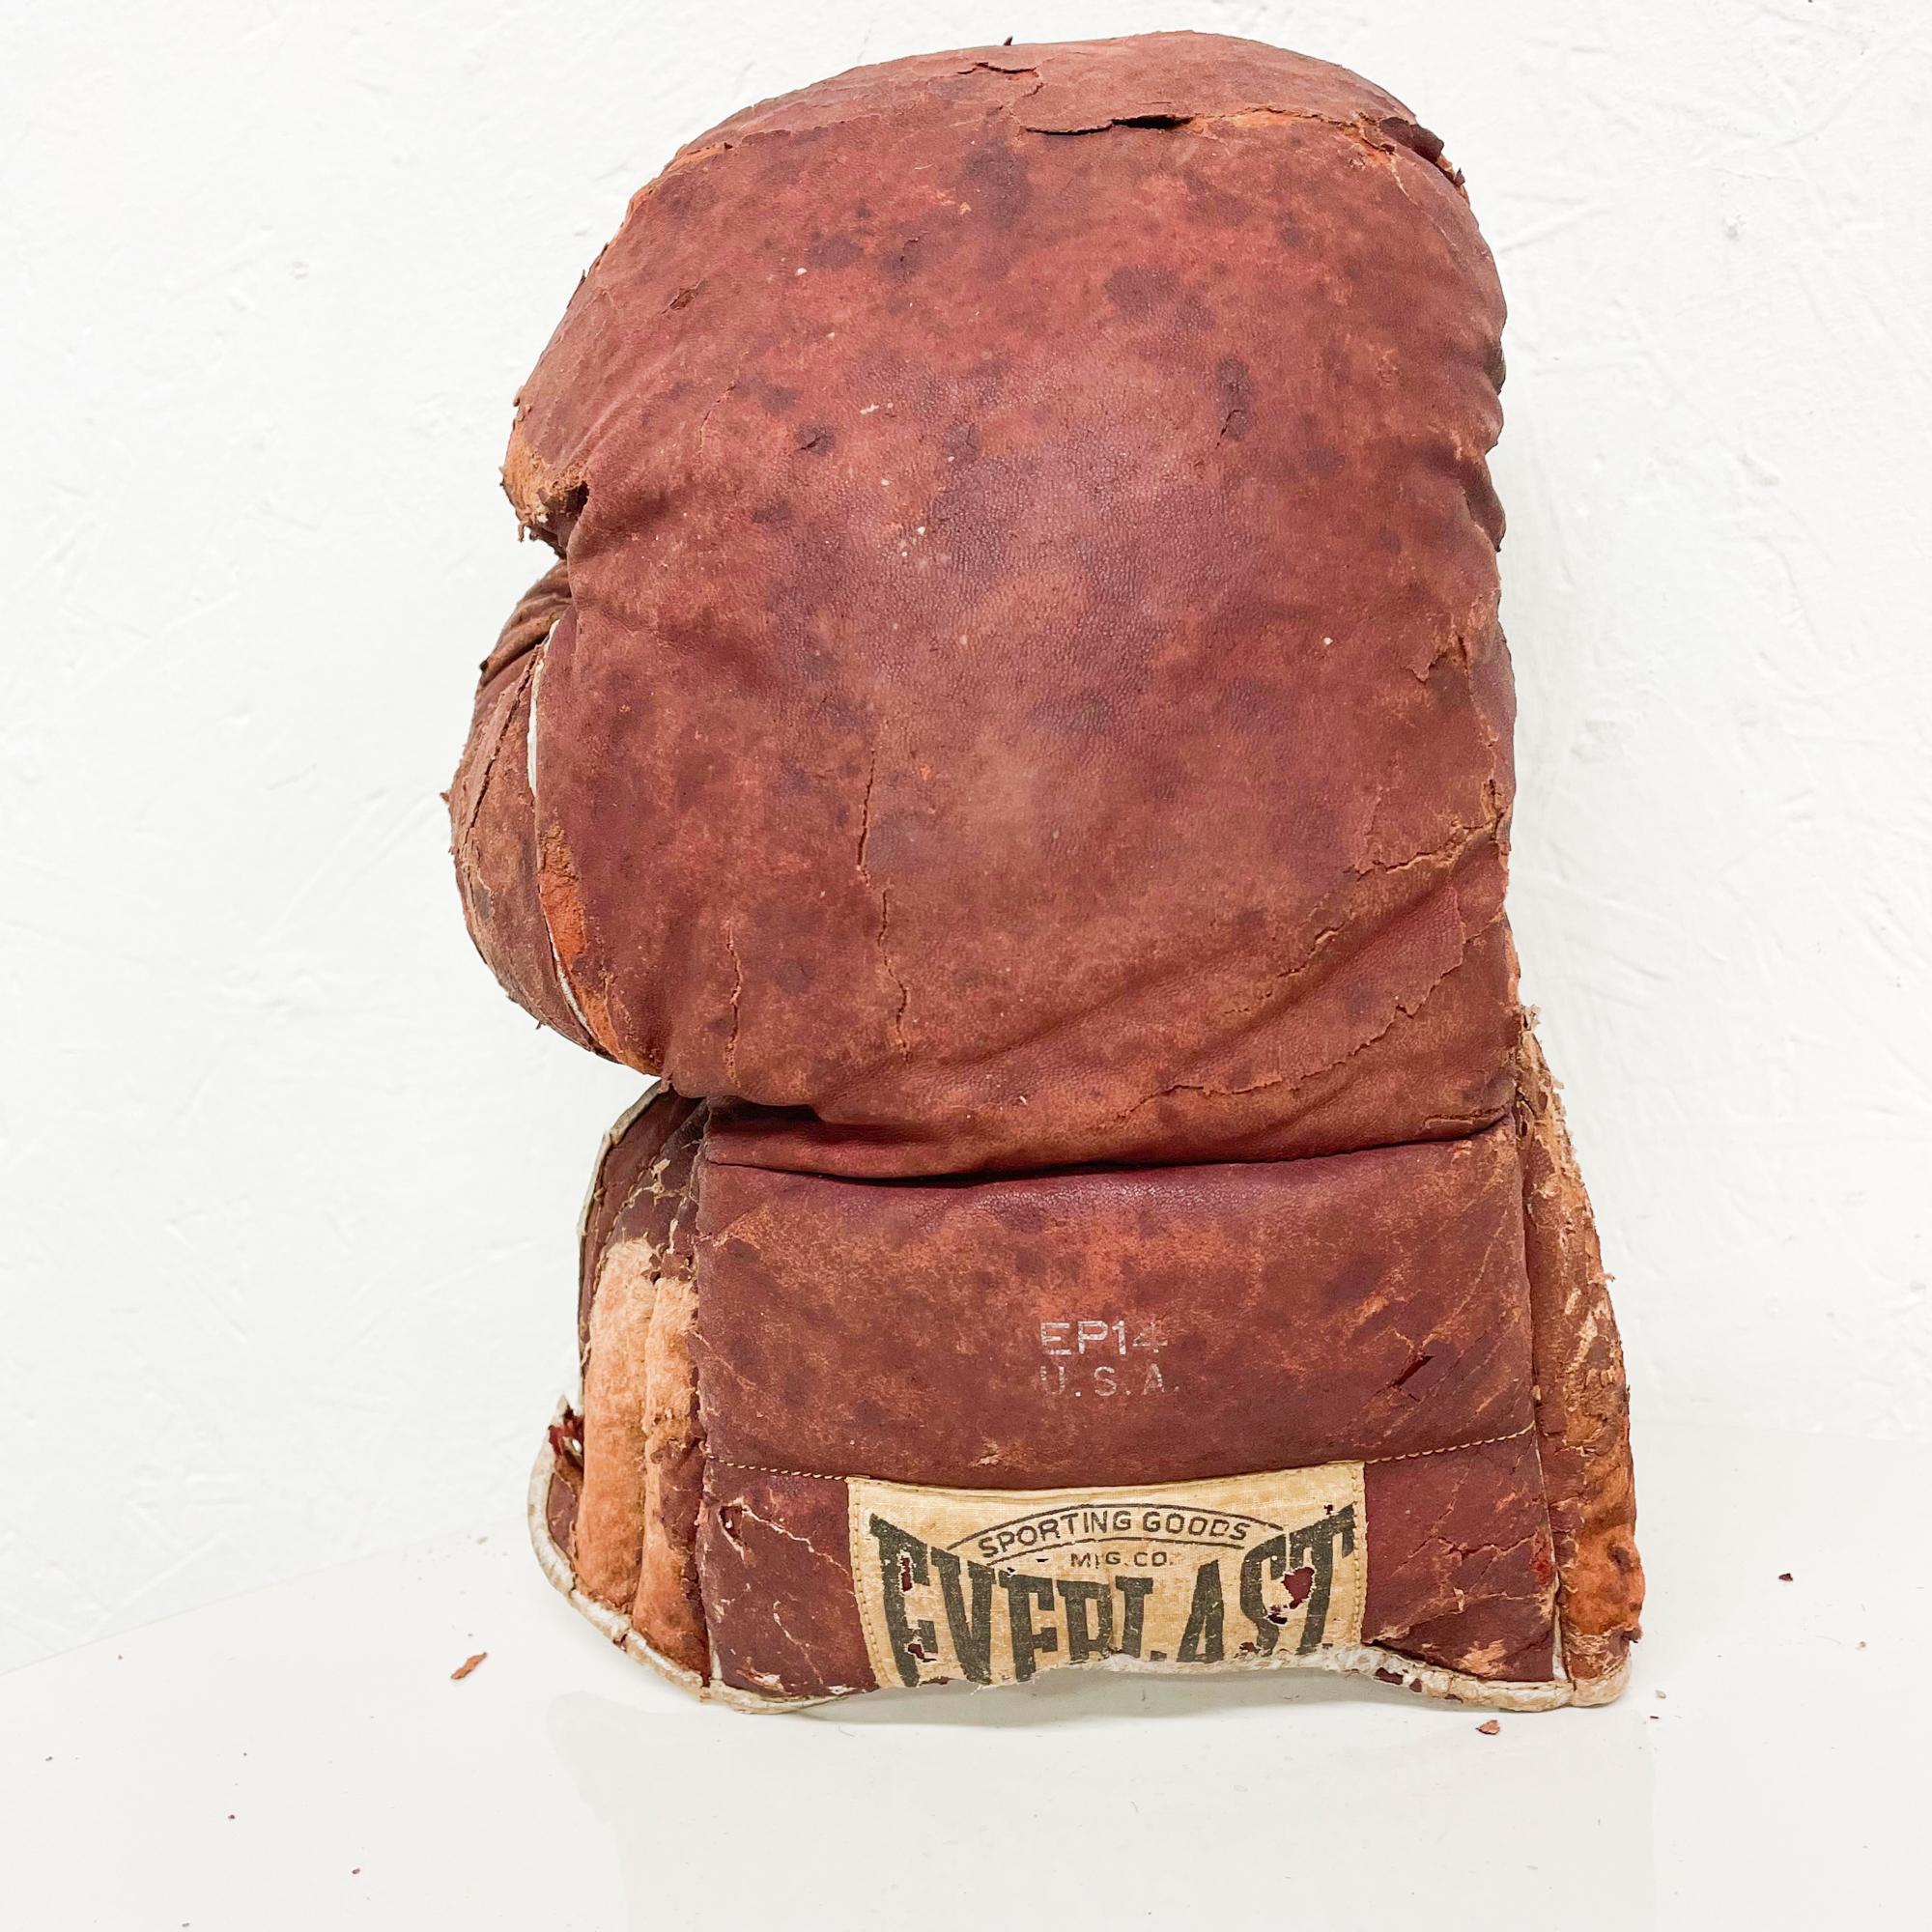 Antique distress battered leather boxing glove Everlast USA
Right Hand
In distressed condition deterioration present. Vintage antique disrepair. Leather material on canvas is coming off. For decorative display use only.
7 W x 12 H x 6 D